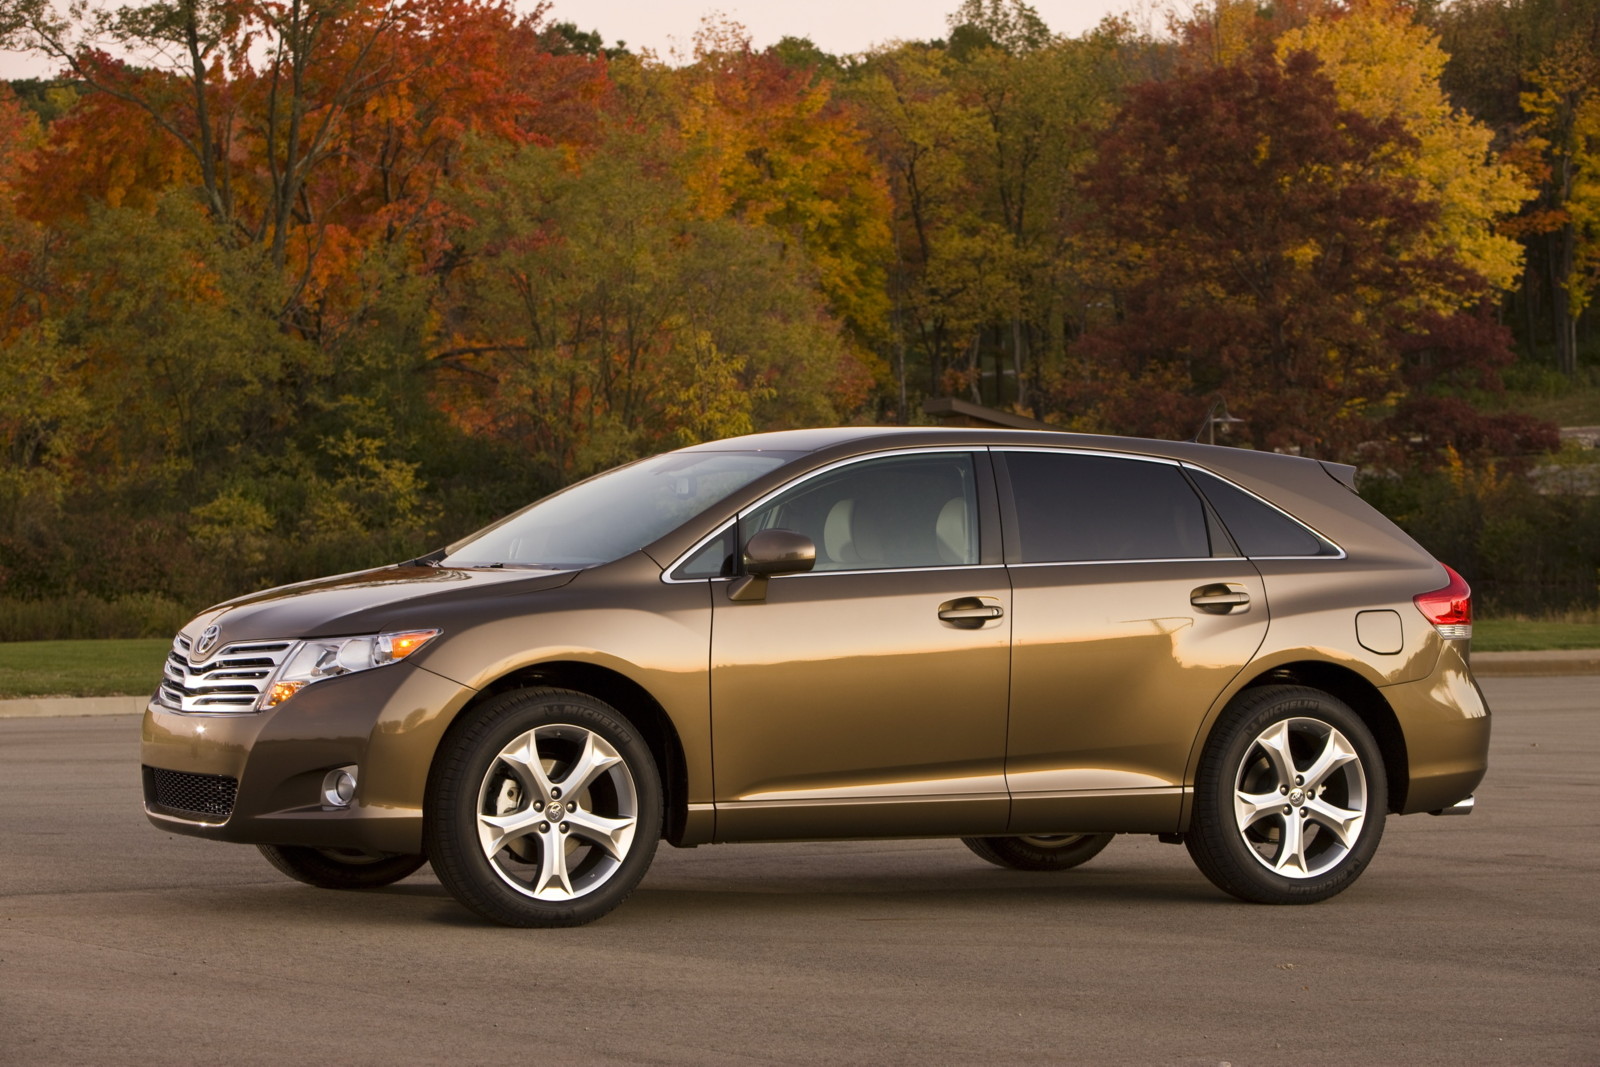 2010 Toyota Venza Prices Reviews  Pictures  CarGurus